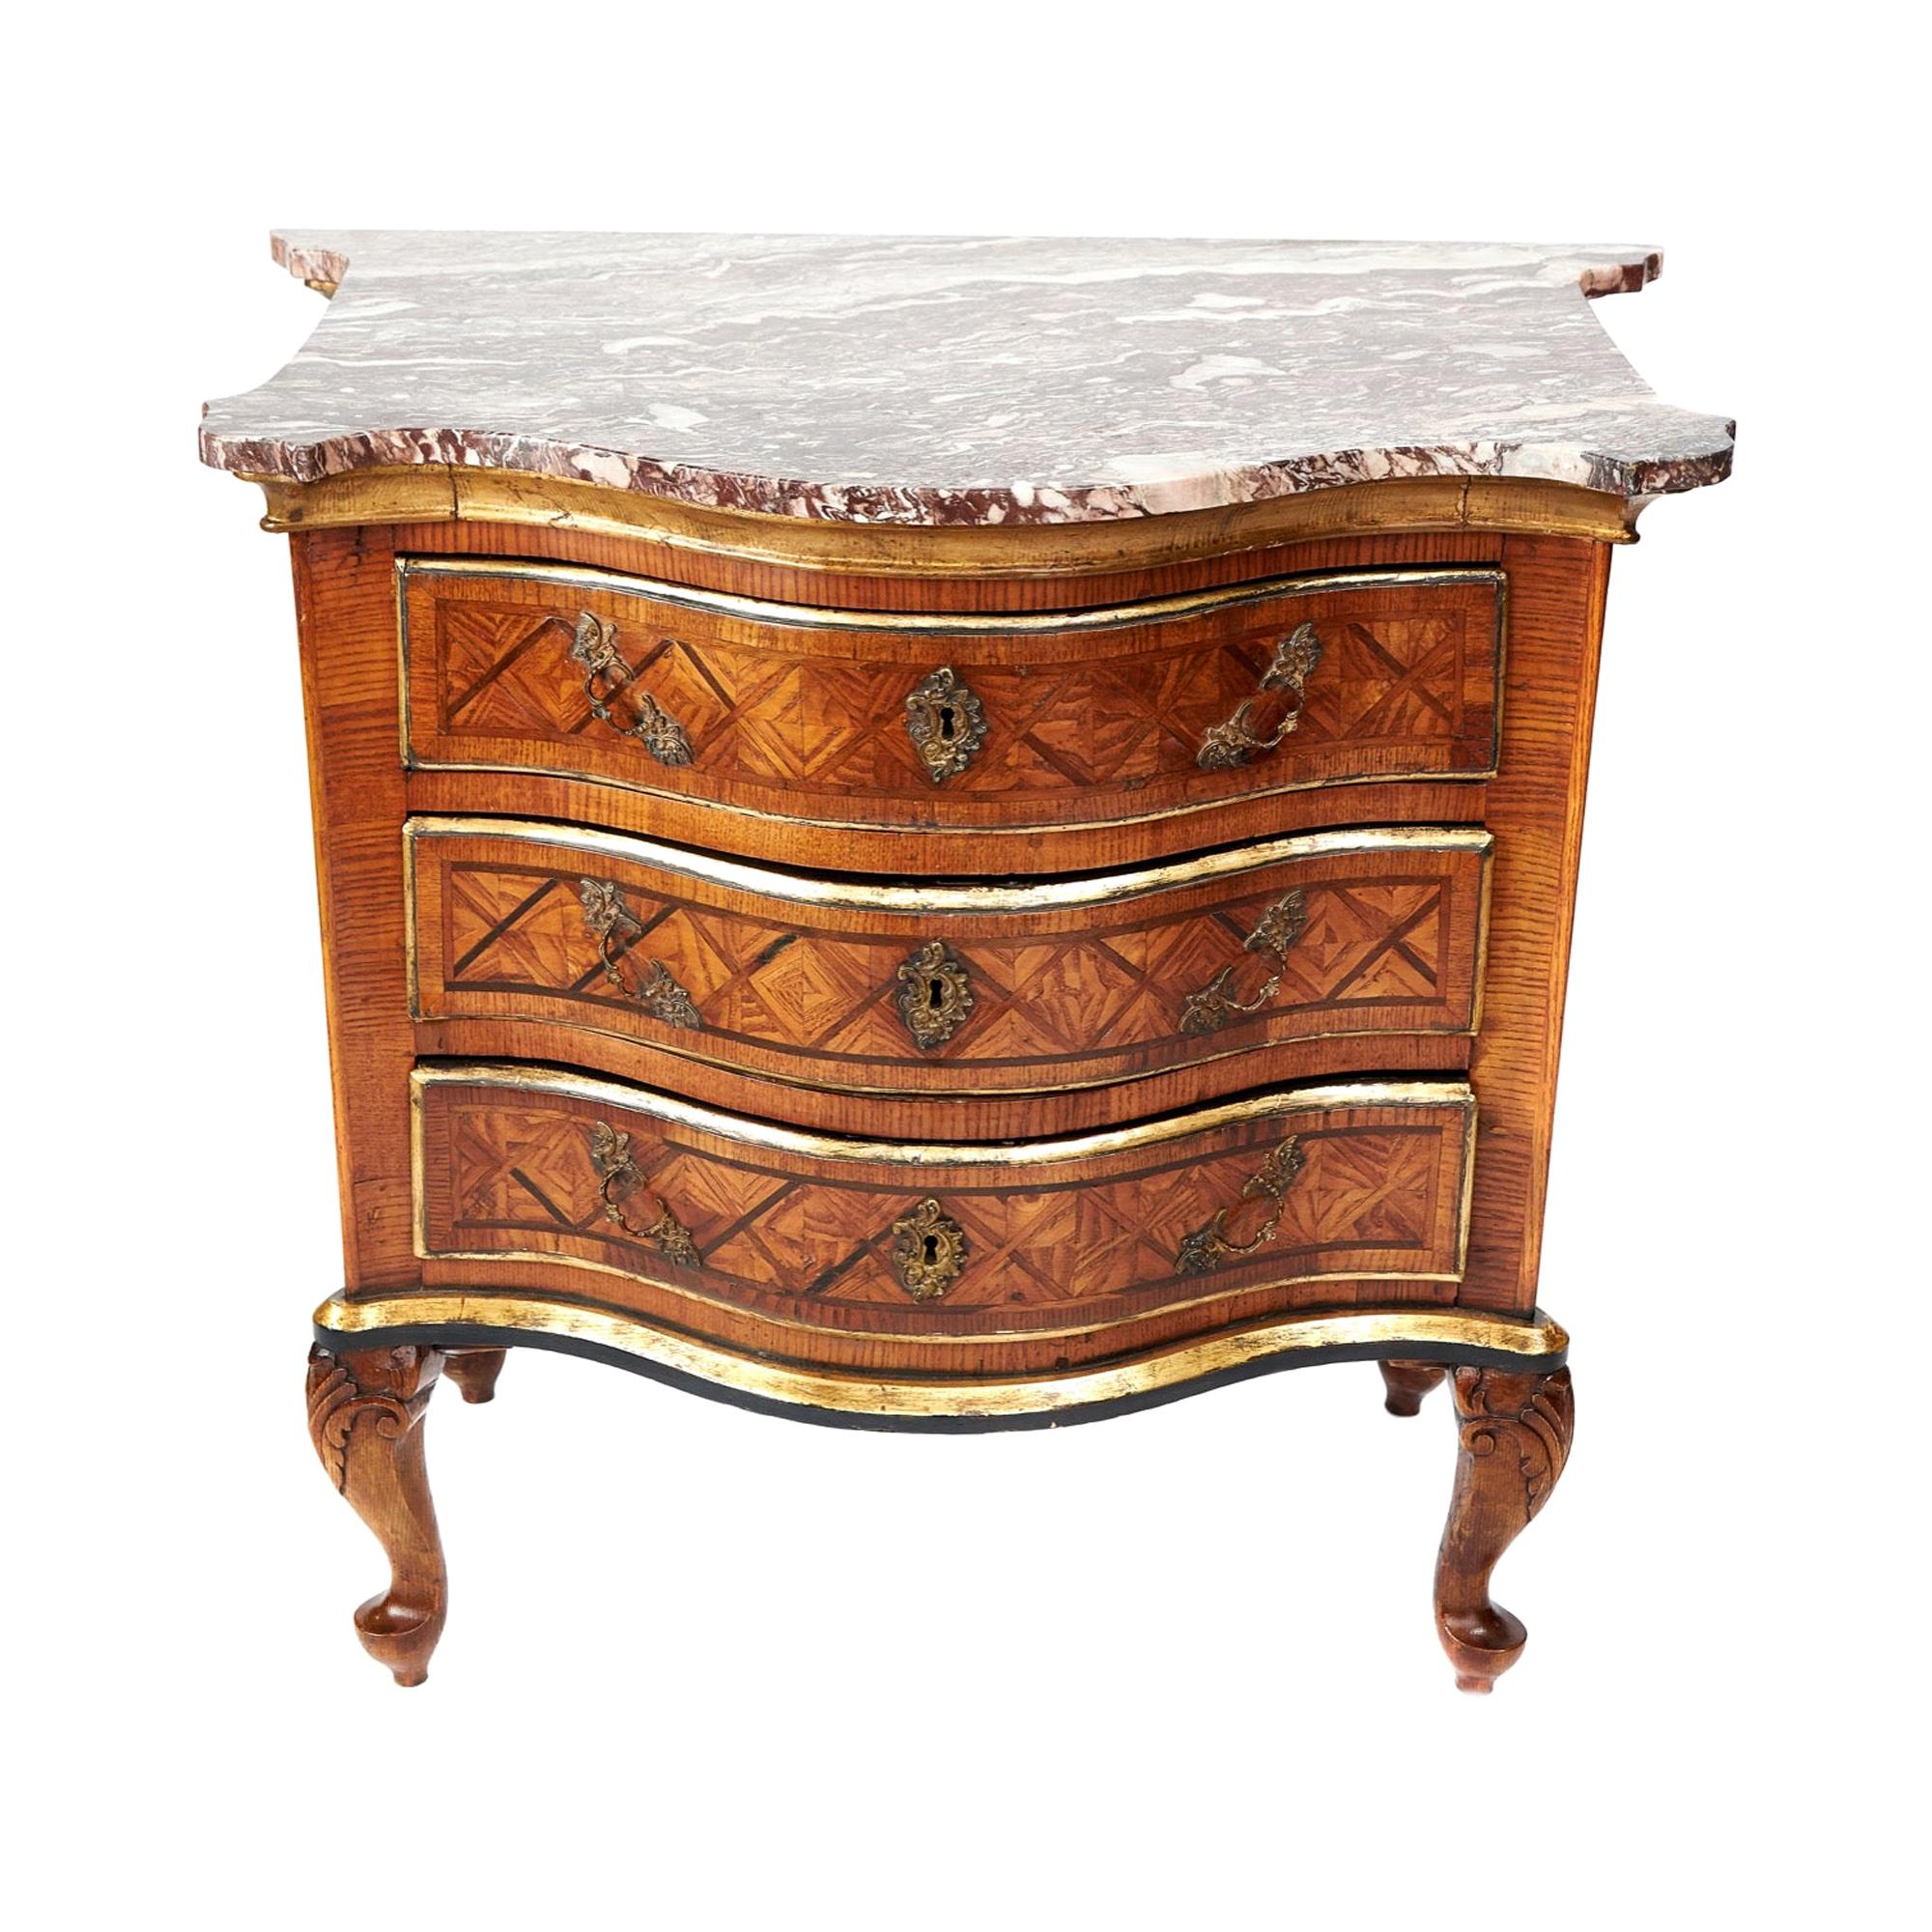 Antique French 19th Century Oak Inlaid Parquetry Commode Chest For Sale